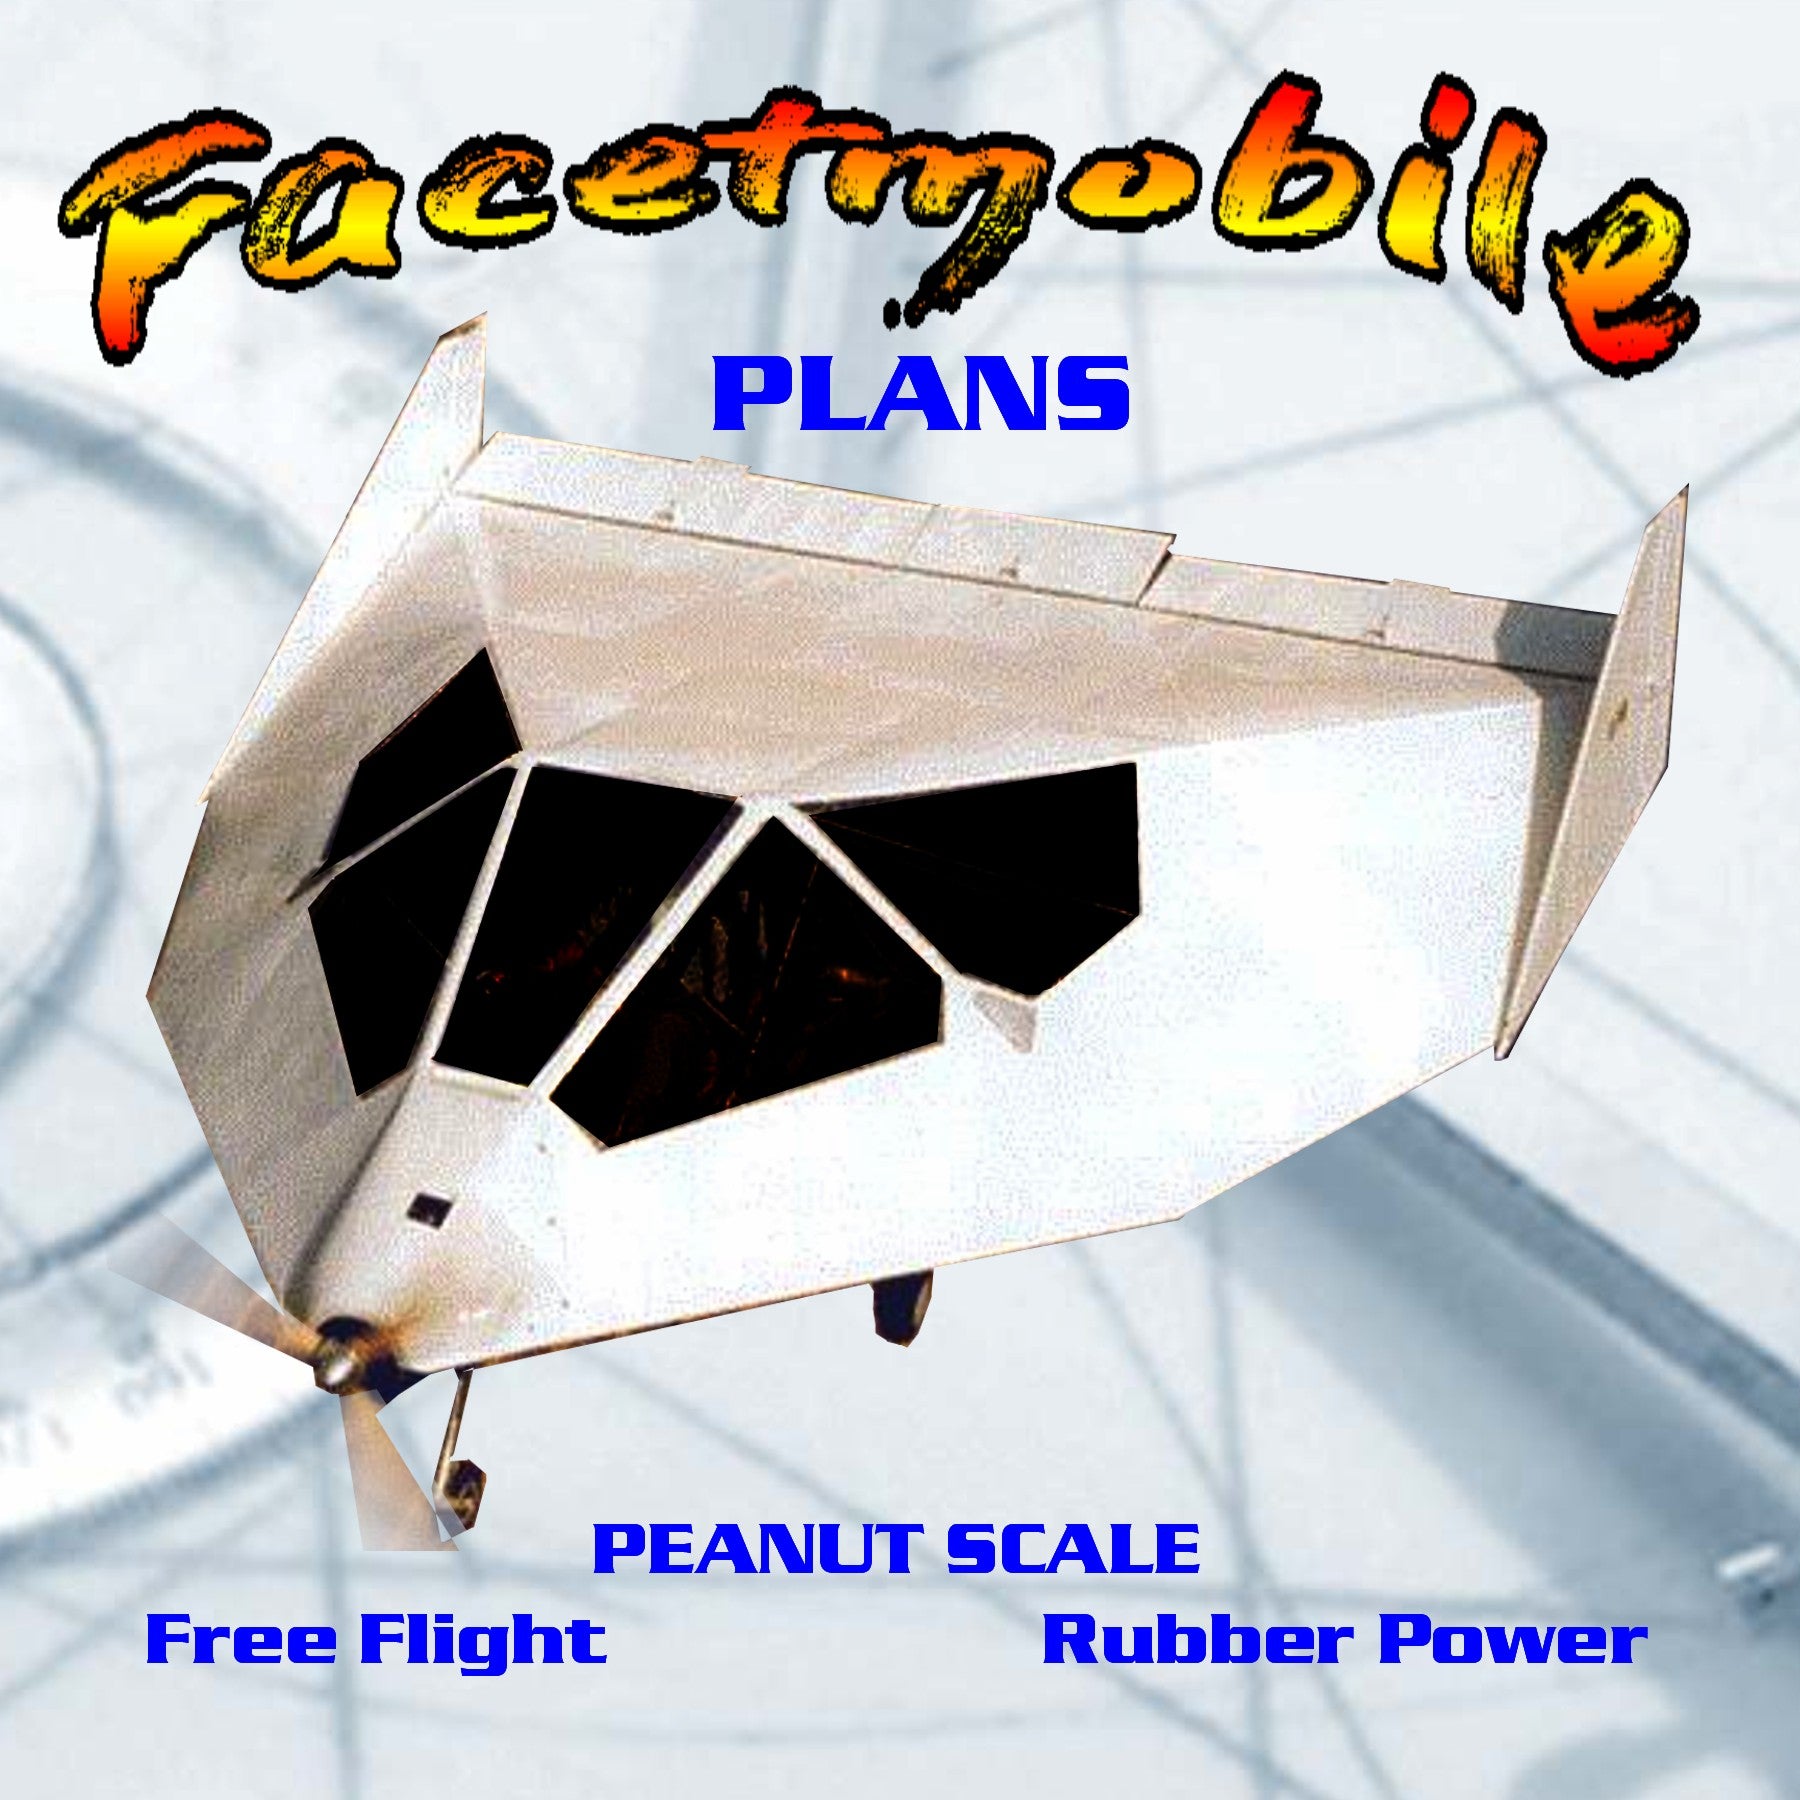 full size printed peanut scale plans facetmobile ready to try something a little out of the ordinary